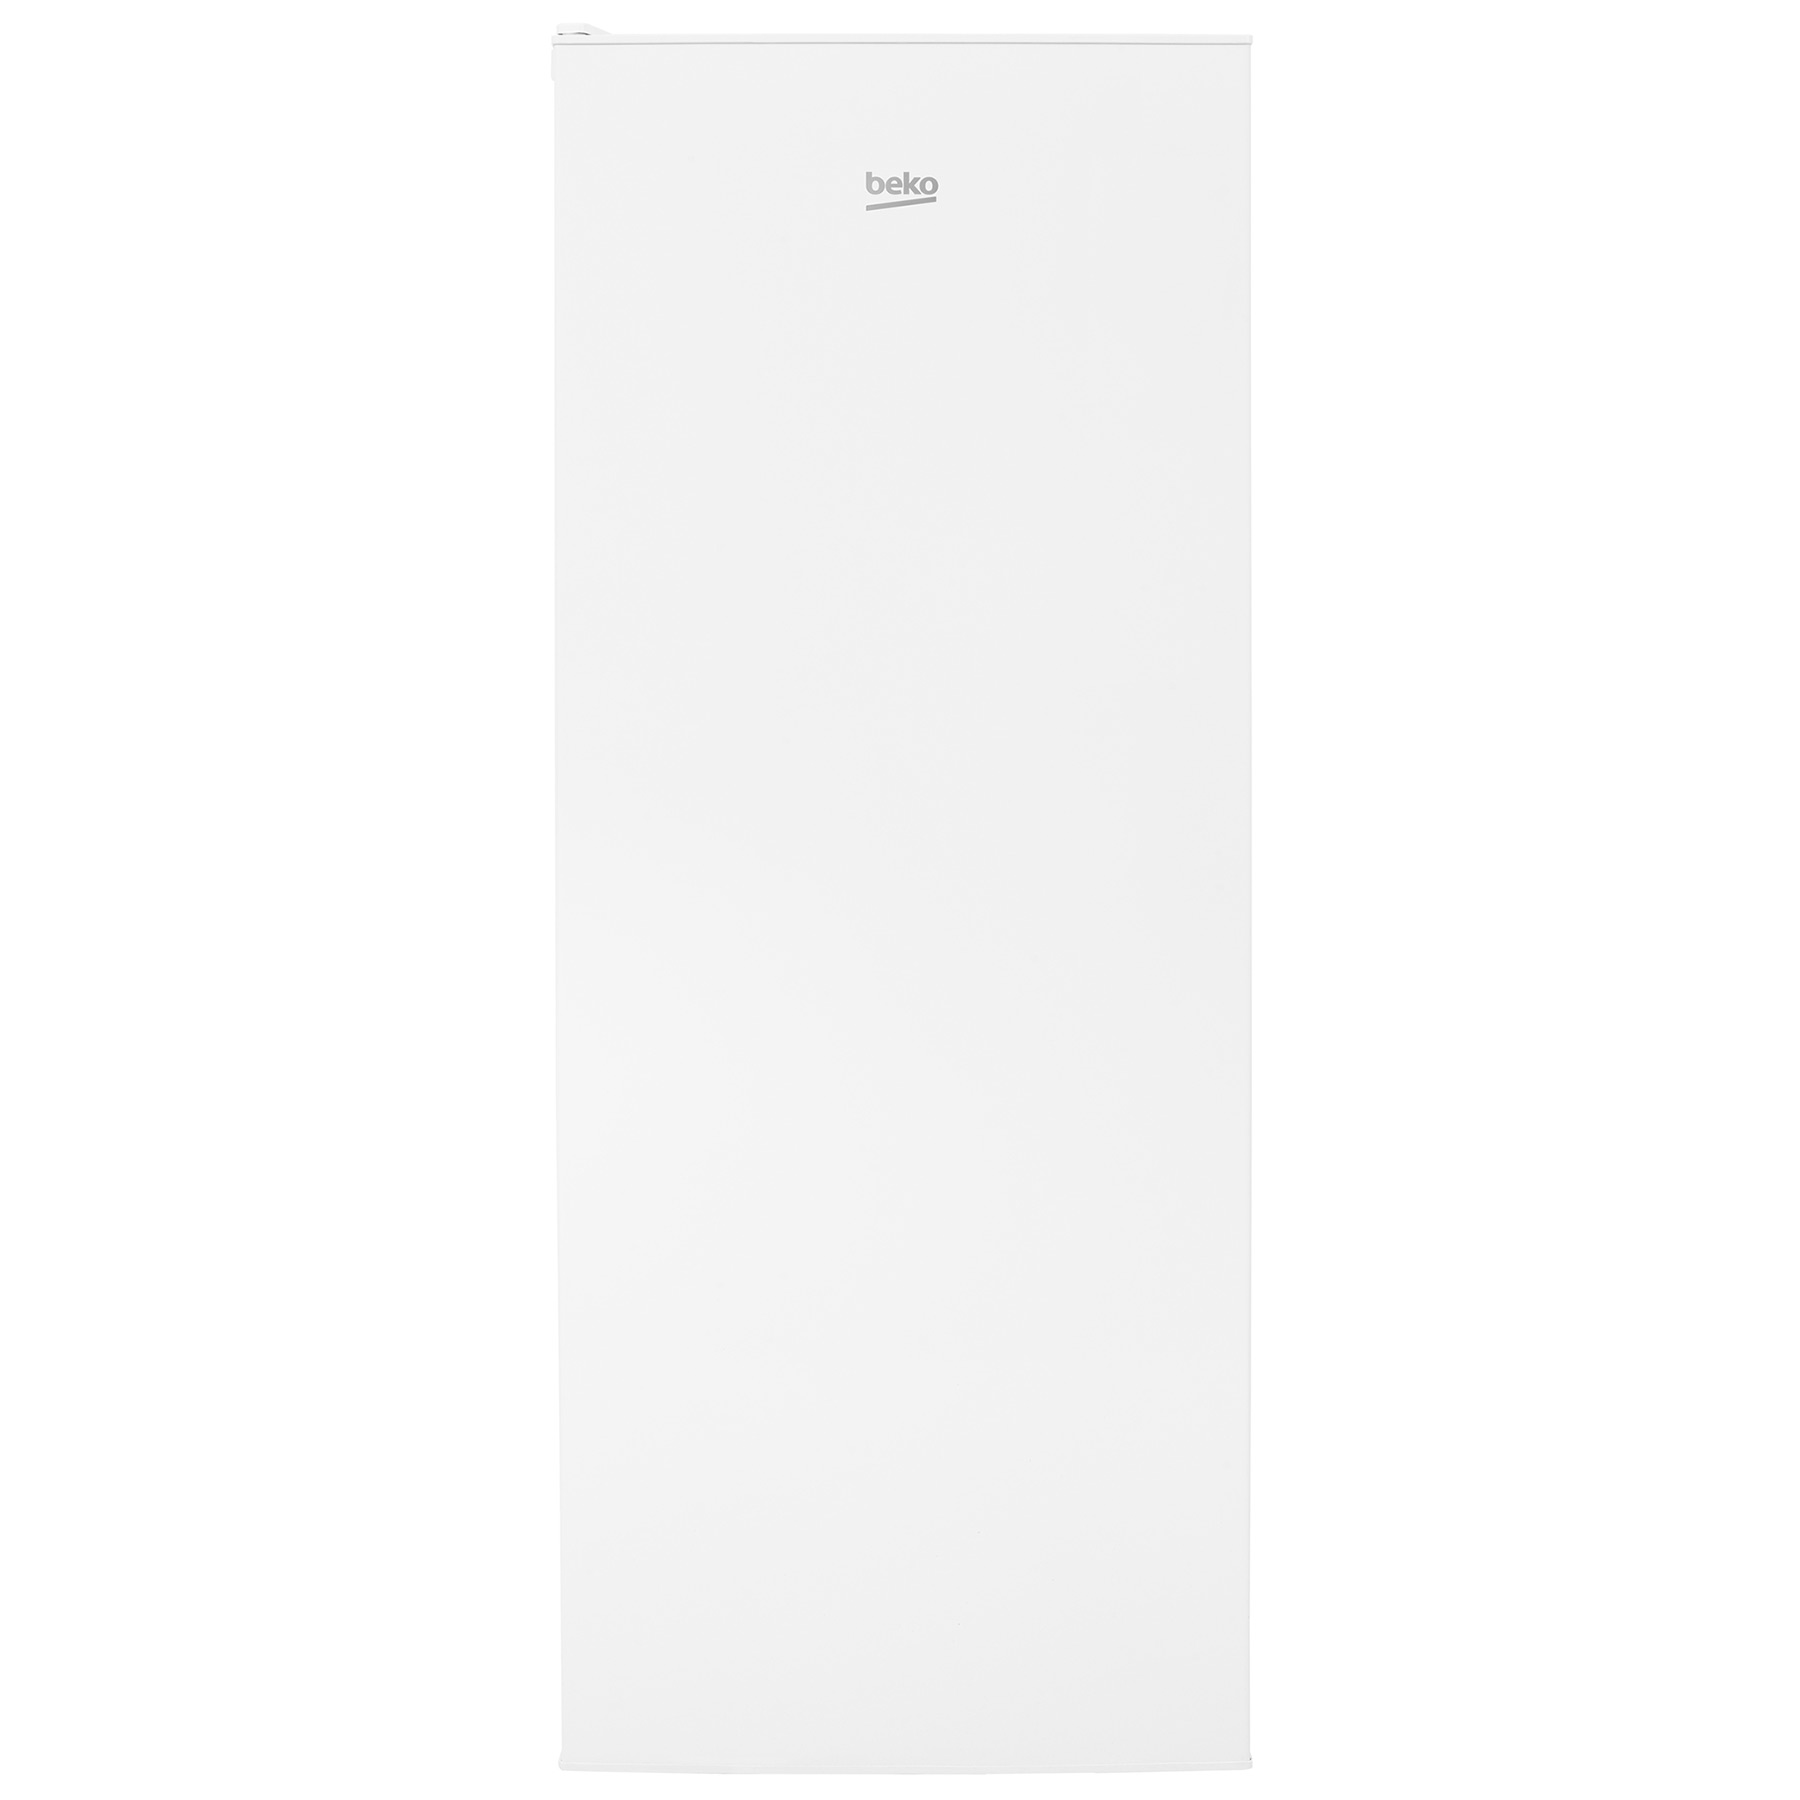 Image of Beko FCFM1545W 55cm Tall Frost Free Freezer White 1 45m F Rated 168L